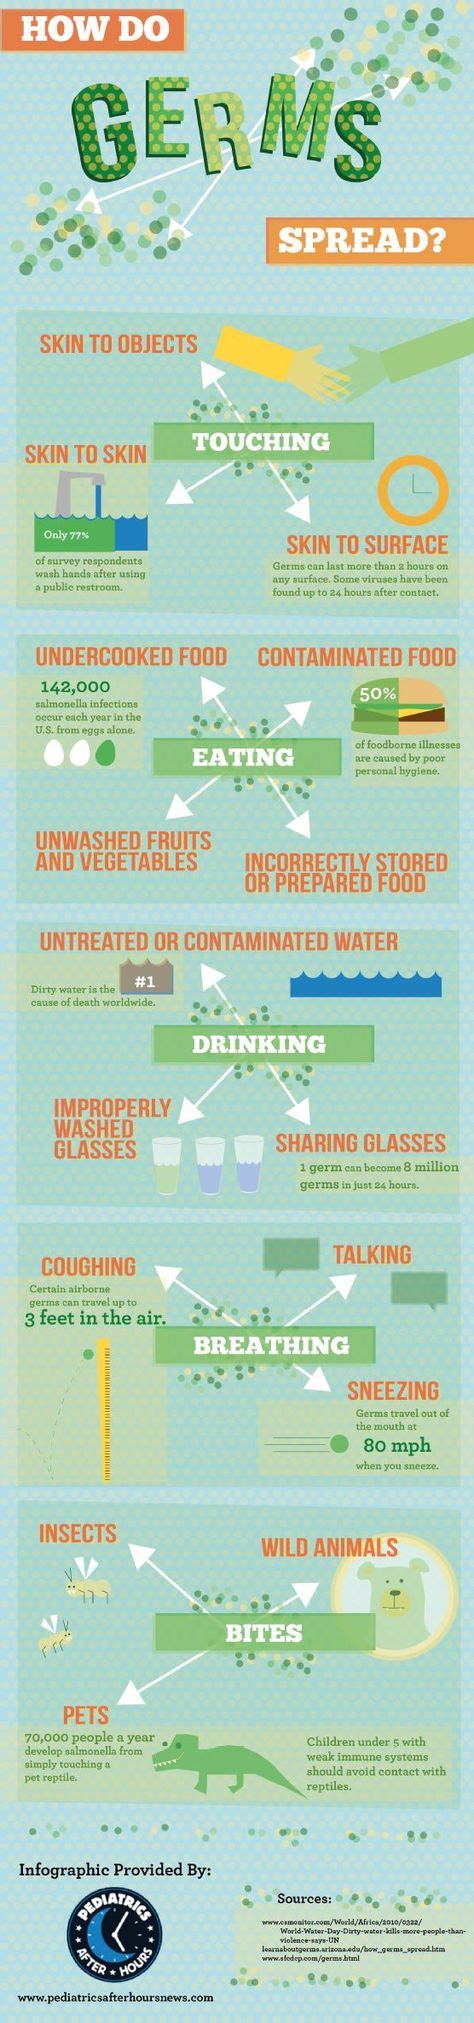 How Do Germs Spread Infographic Microbiology Class Hand Hygiene